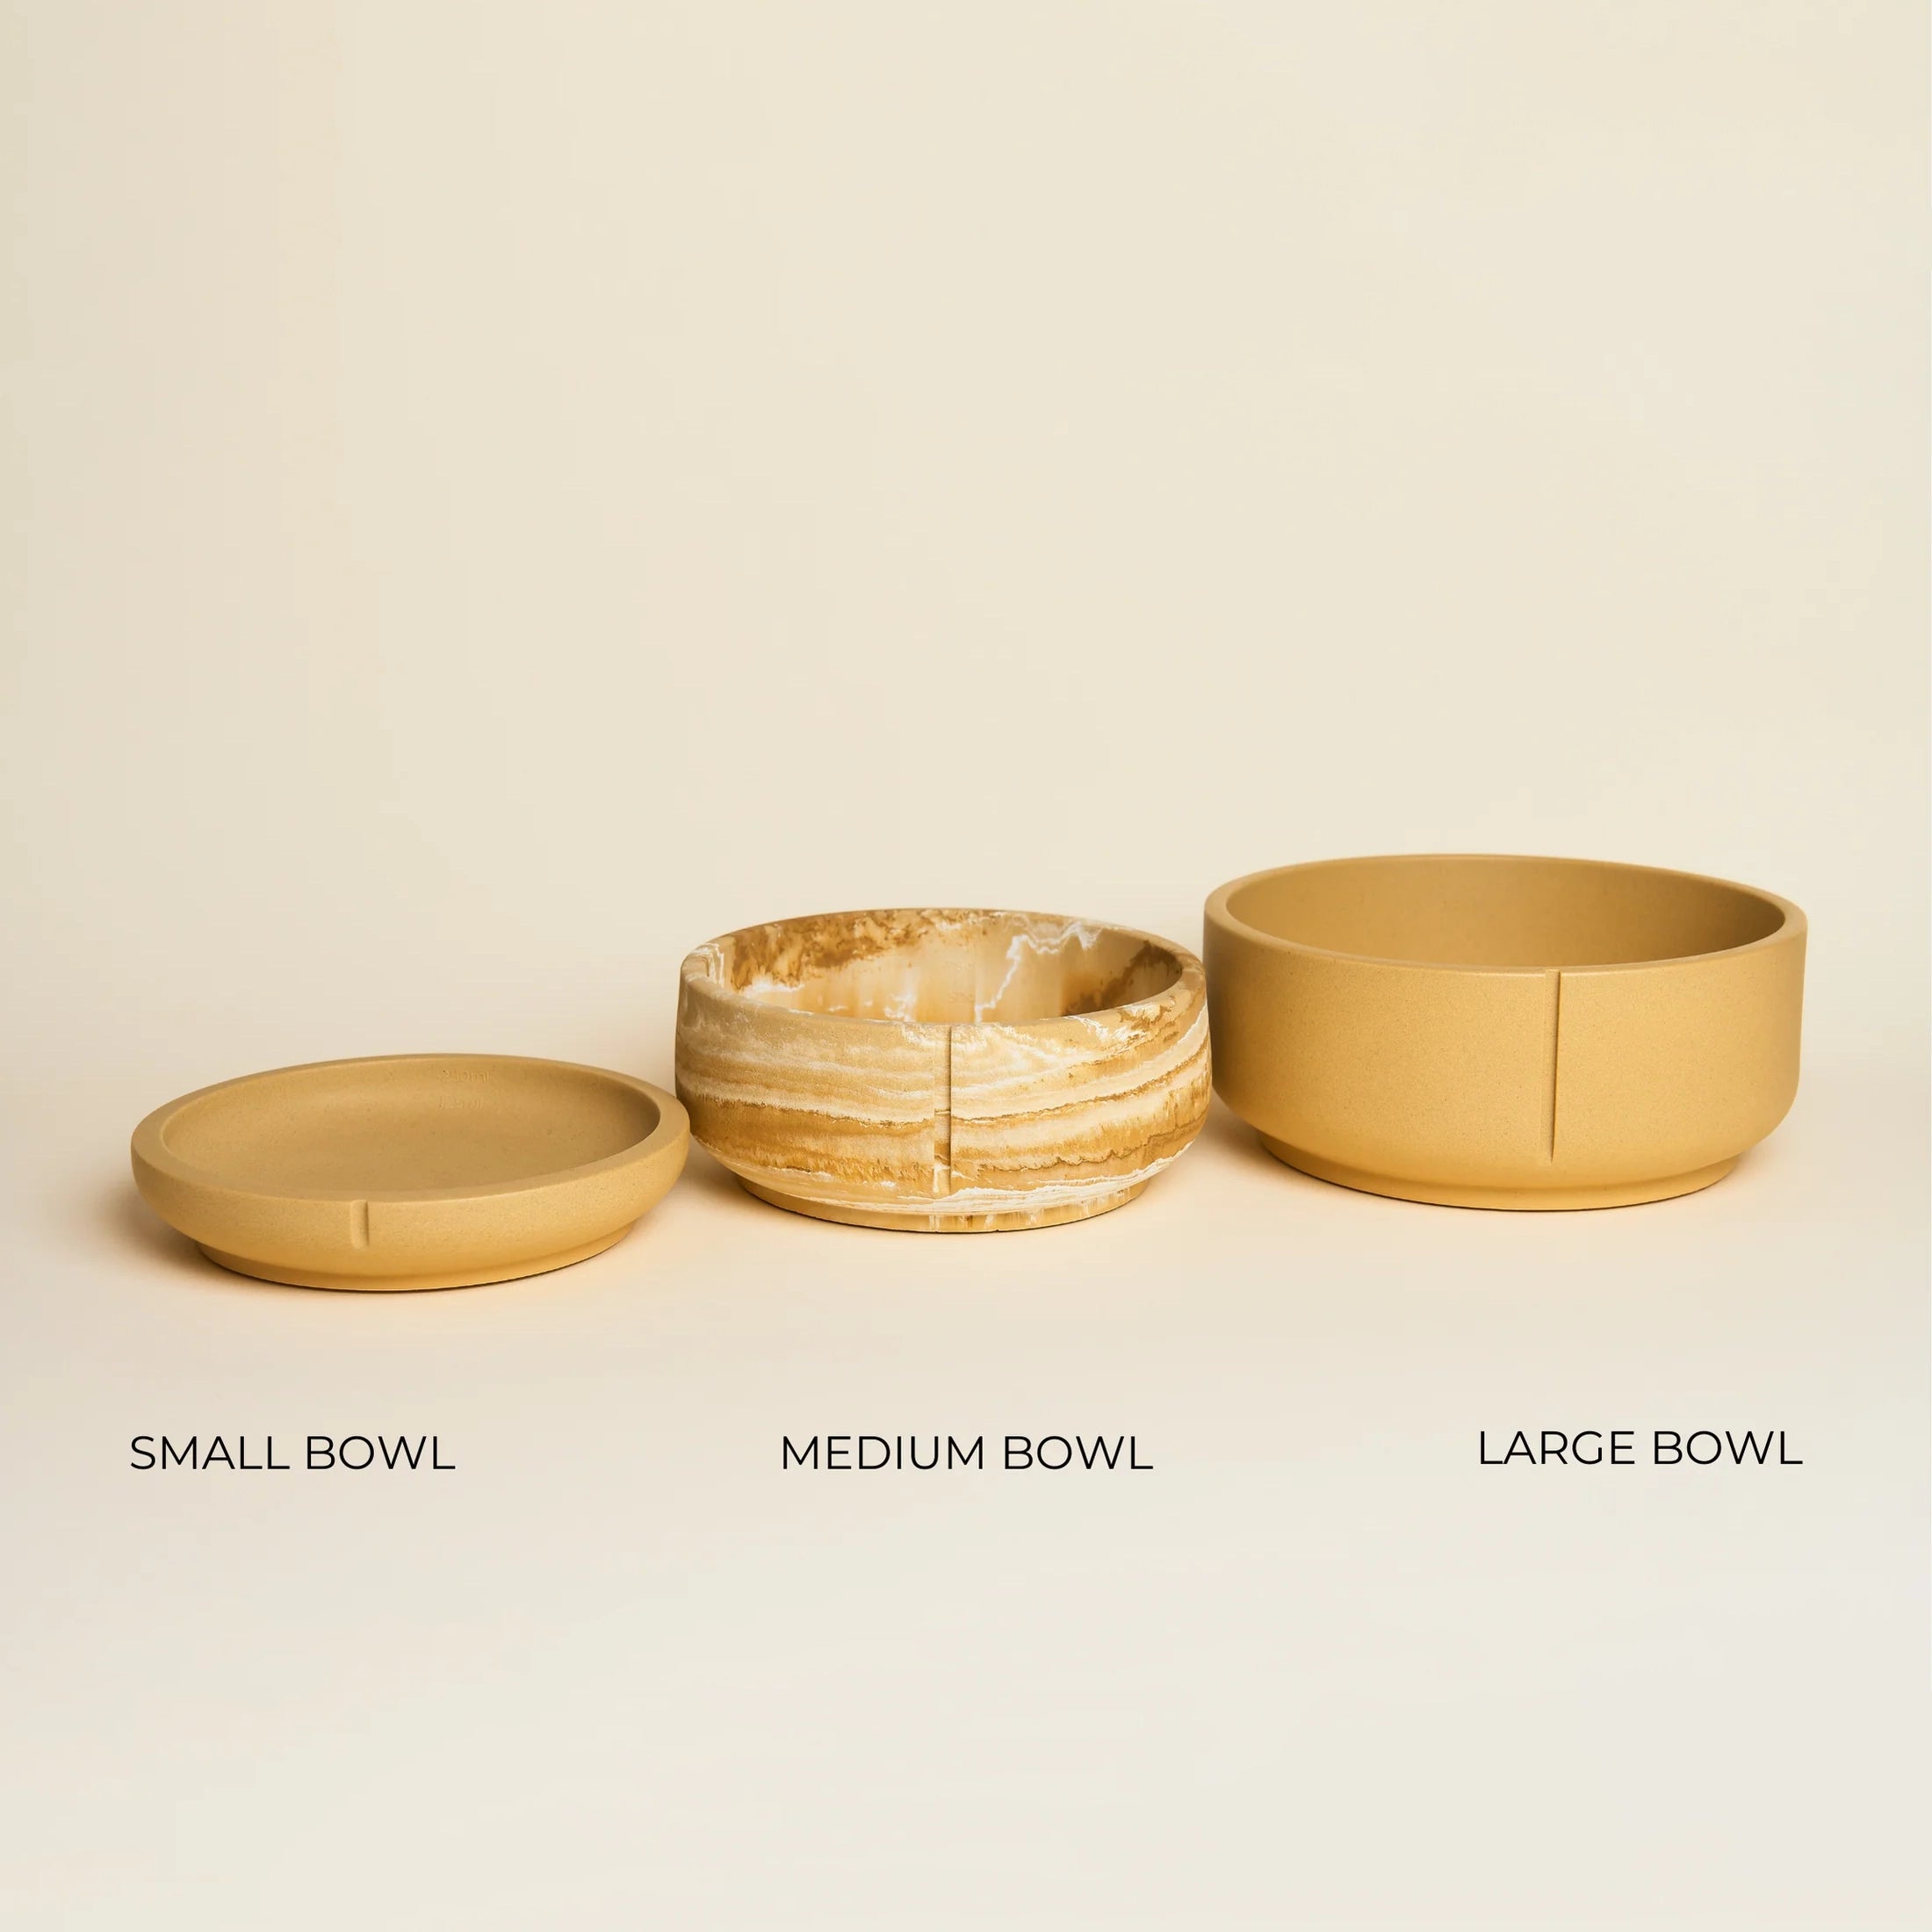 Classic Feeder Bowl - Camel Brown Marble